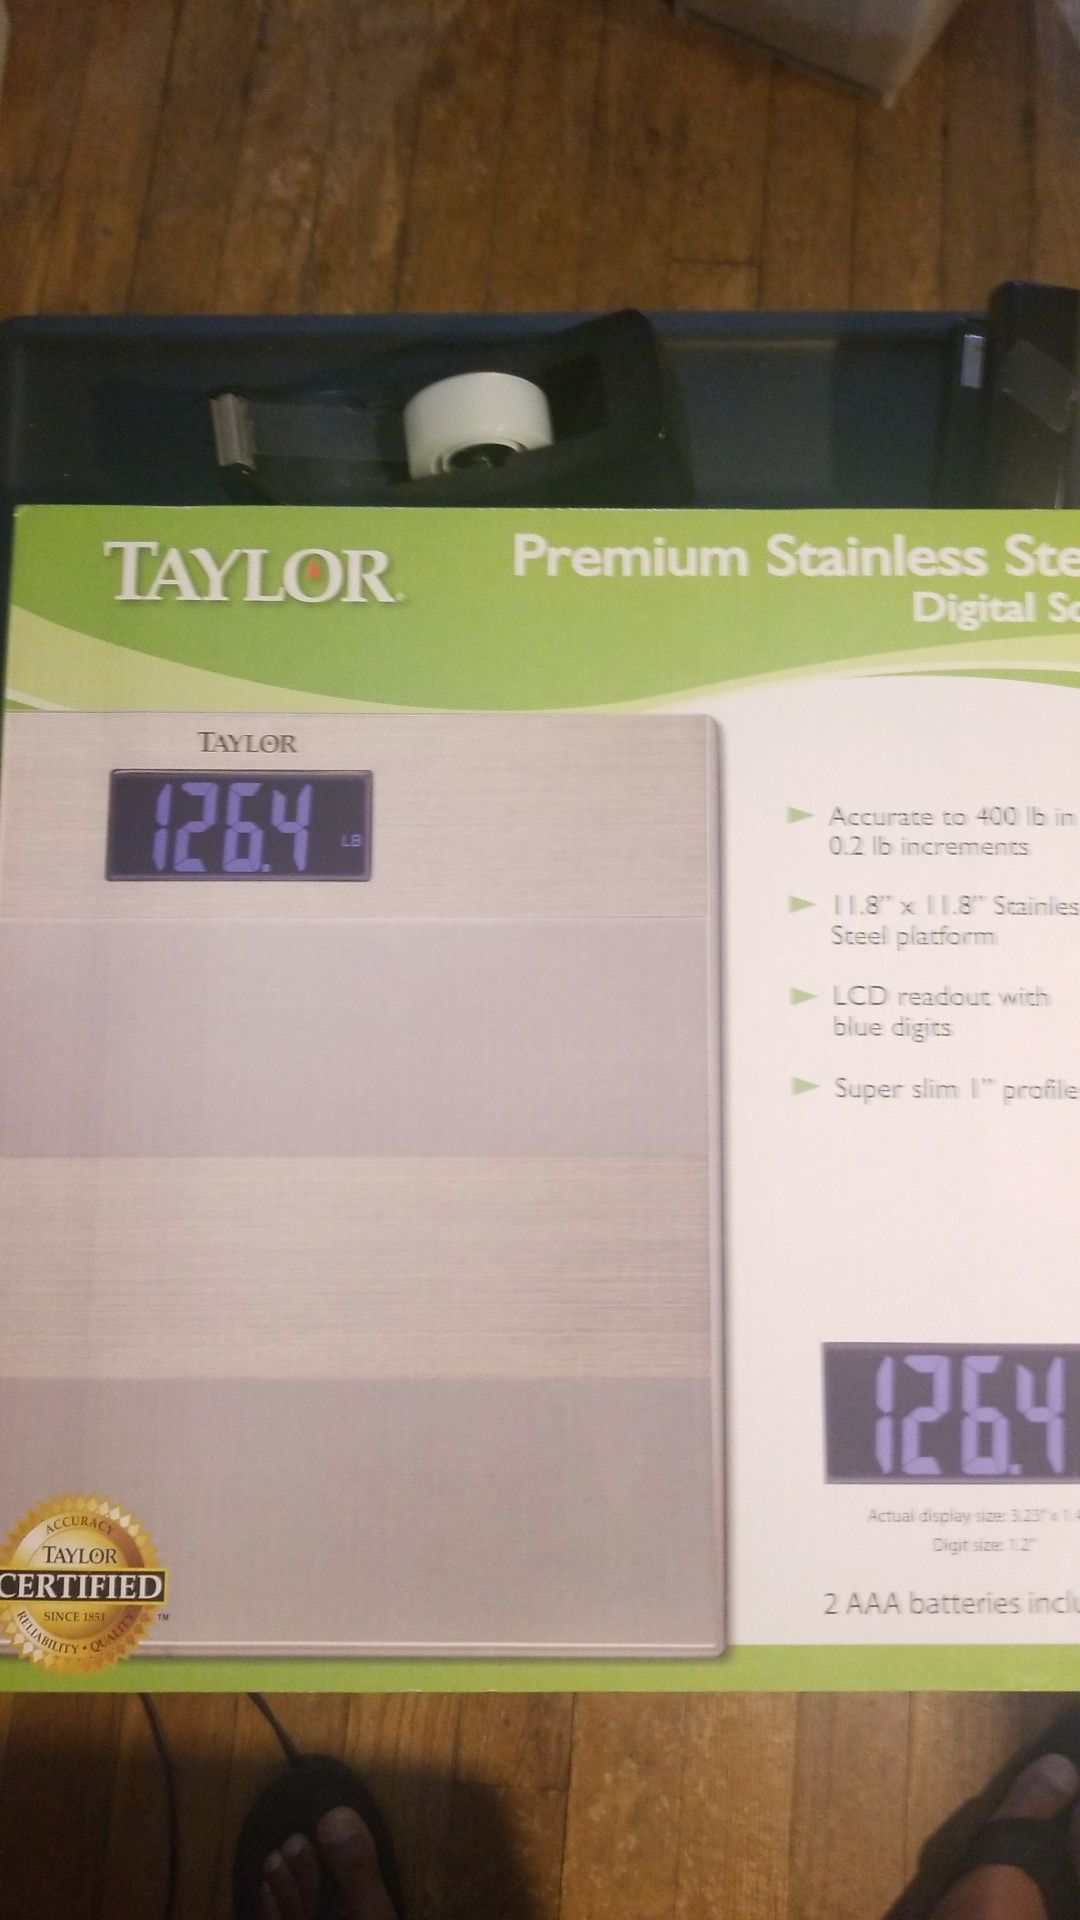 Taylor Premium Stainless Steel Digital Weight Scale